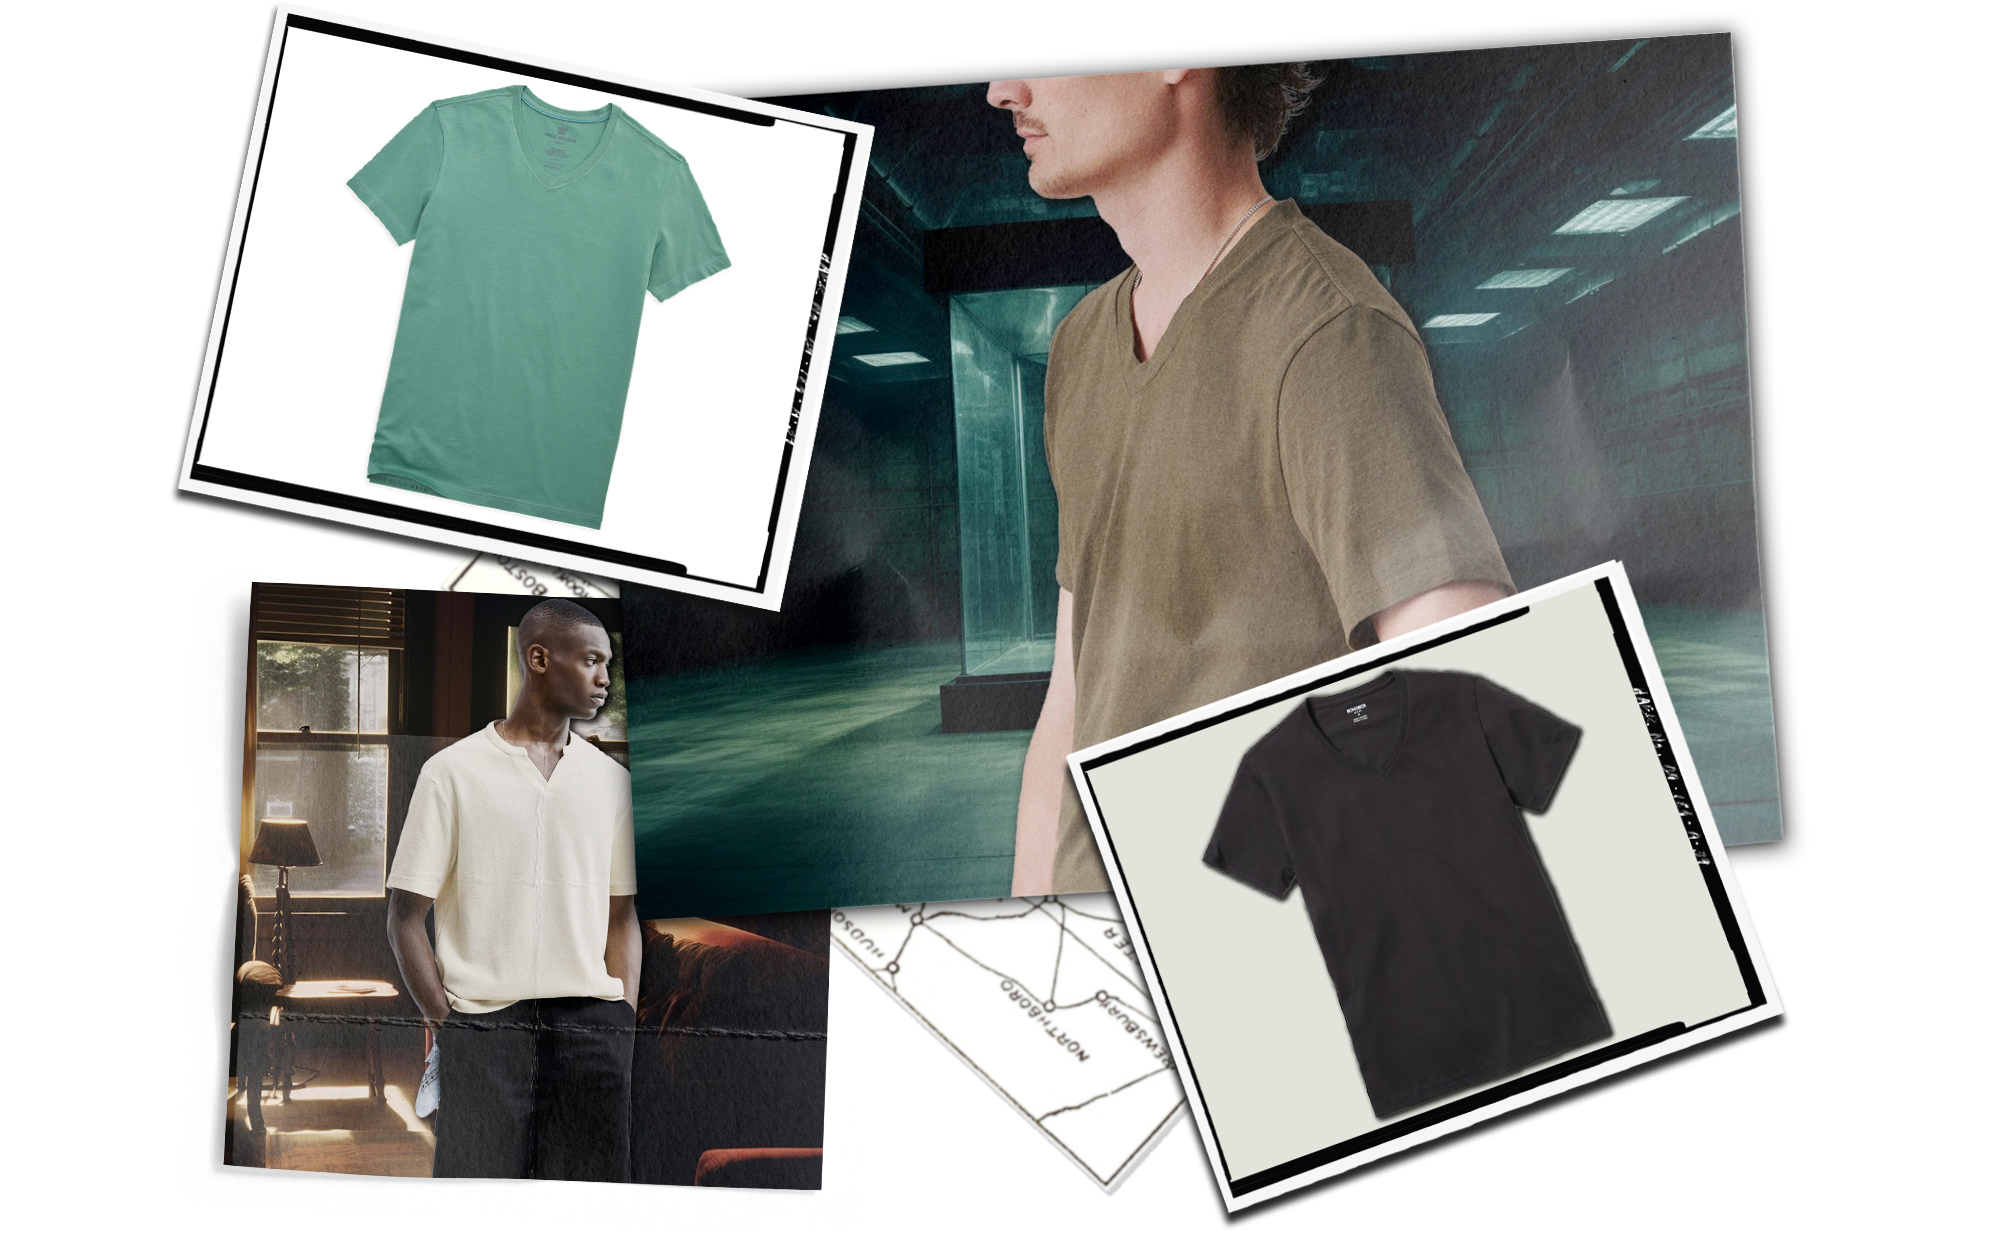 The Best V-Neck T-Shirts for Men, According to Fashion Designers